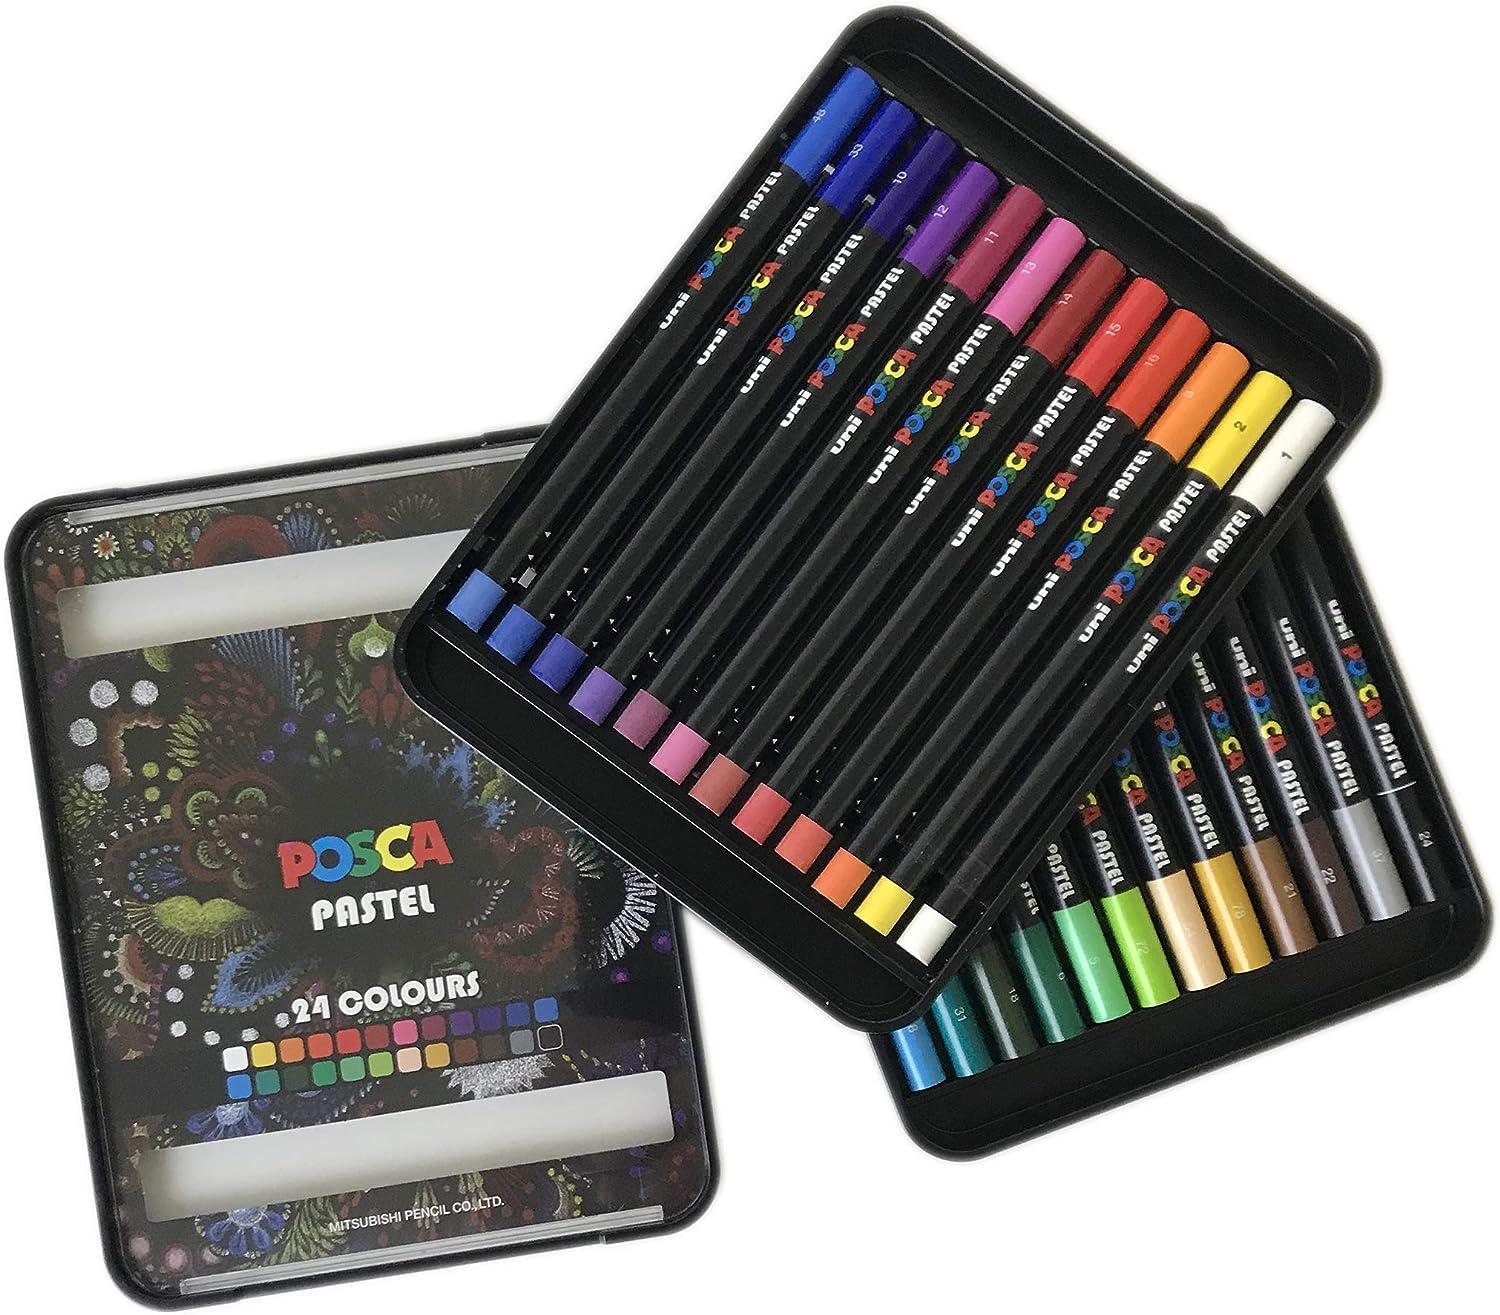 Posca Crayons Art Set of 24 Pastels Art Supplies, Crayons for Adults and  Kids Ages 2-4 and Up Toddler Crayons and Adult Crayons Crayons Bulk  Coloring Set Crayon Box